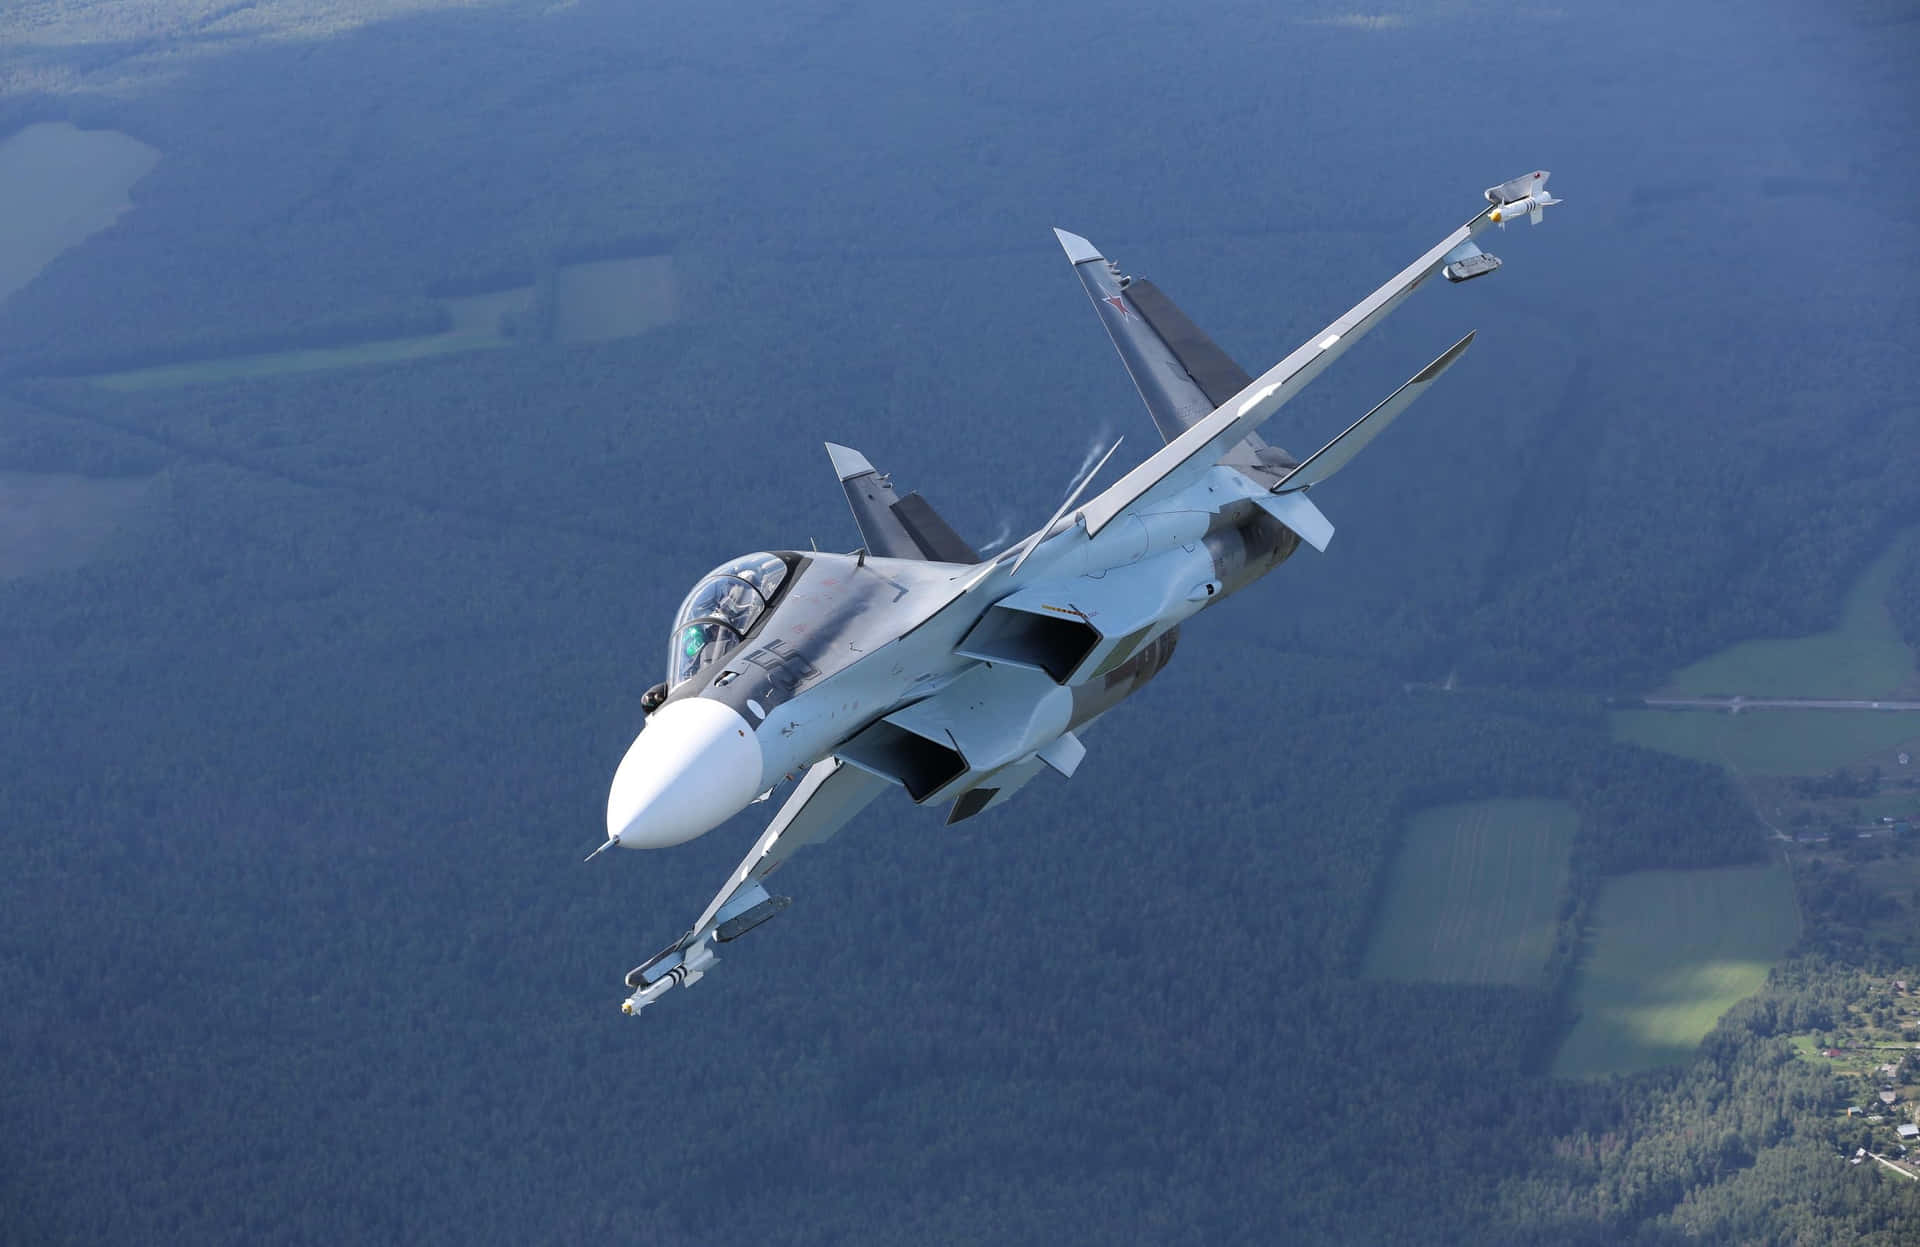 A Fighter Jet Flying Over A Forest